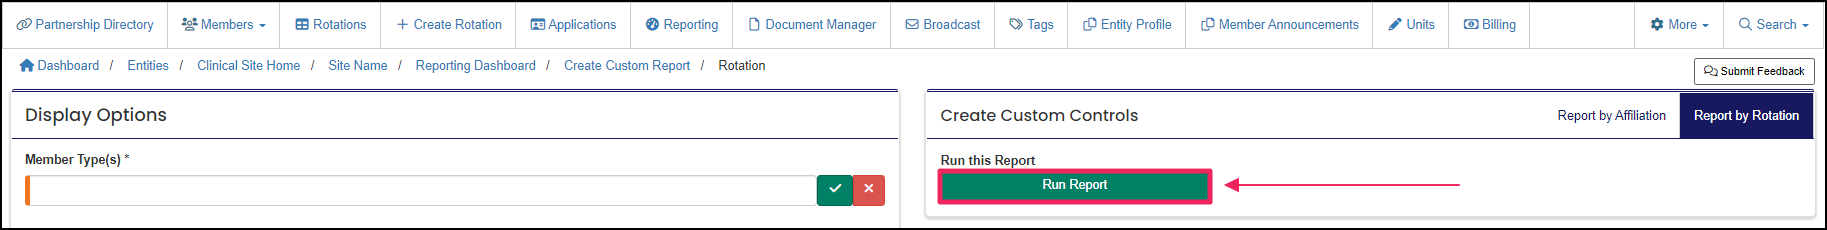 image of Report Controls panel highlighting Run Report button